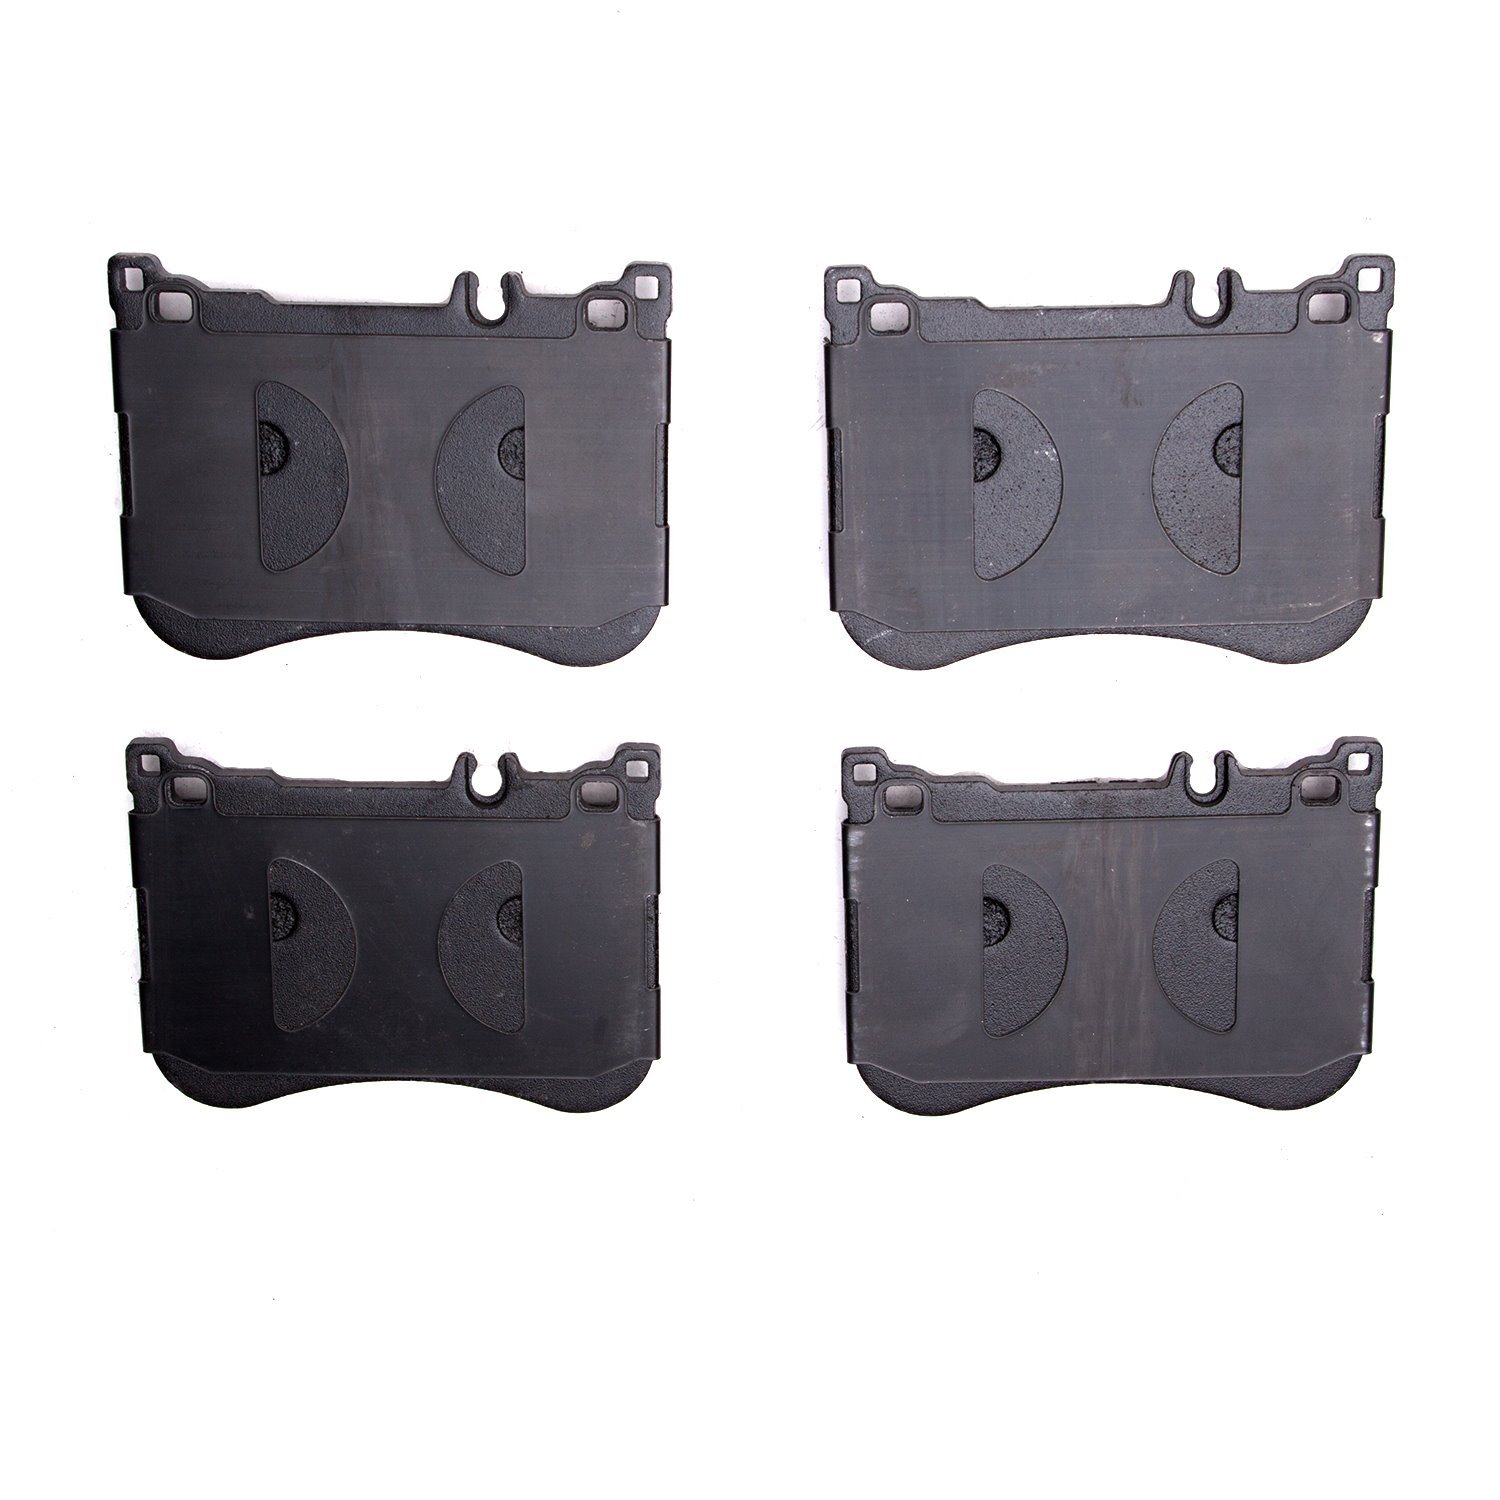 1551-1688-00 5000 Advanced Low-Metallic Brake Pads, Fits Select Mercedes-Benz, Position: Front